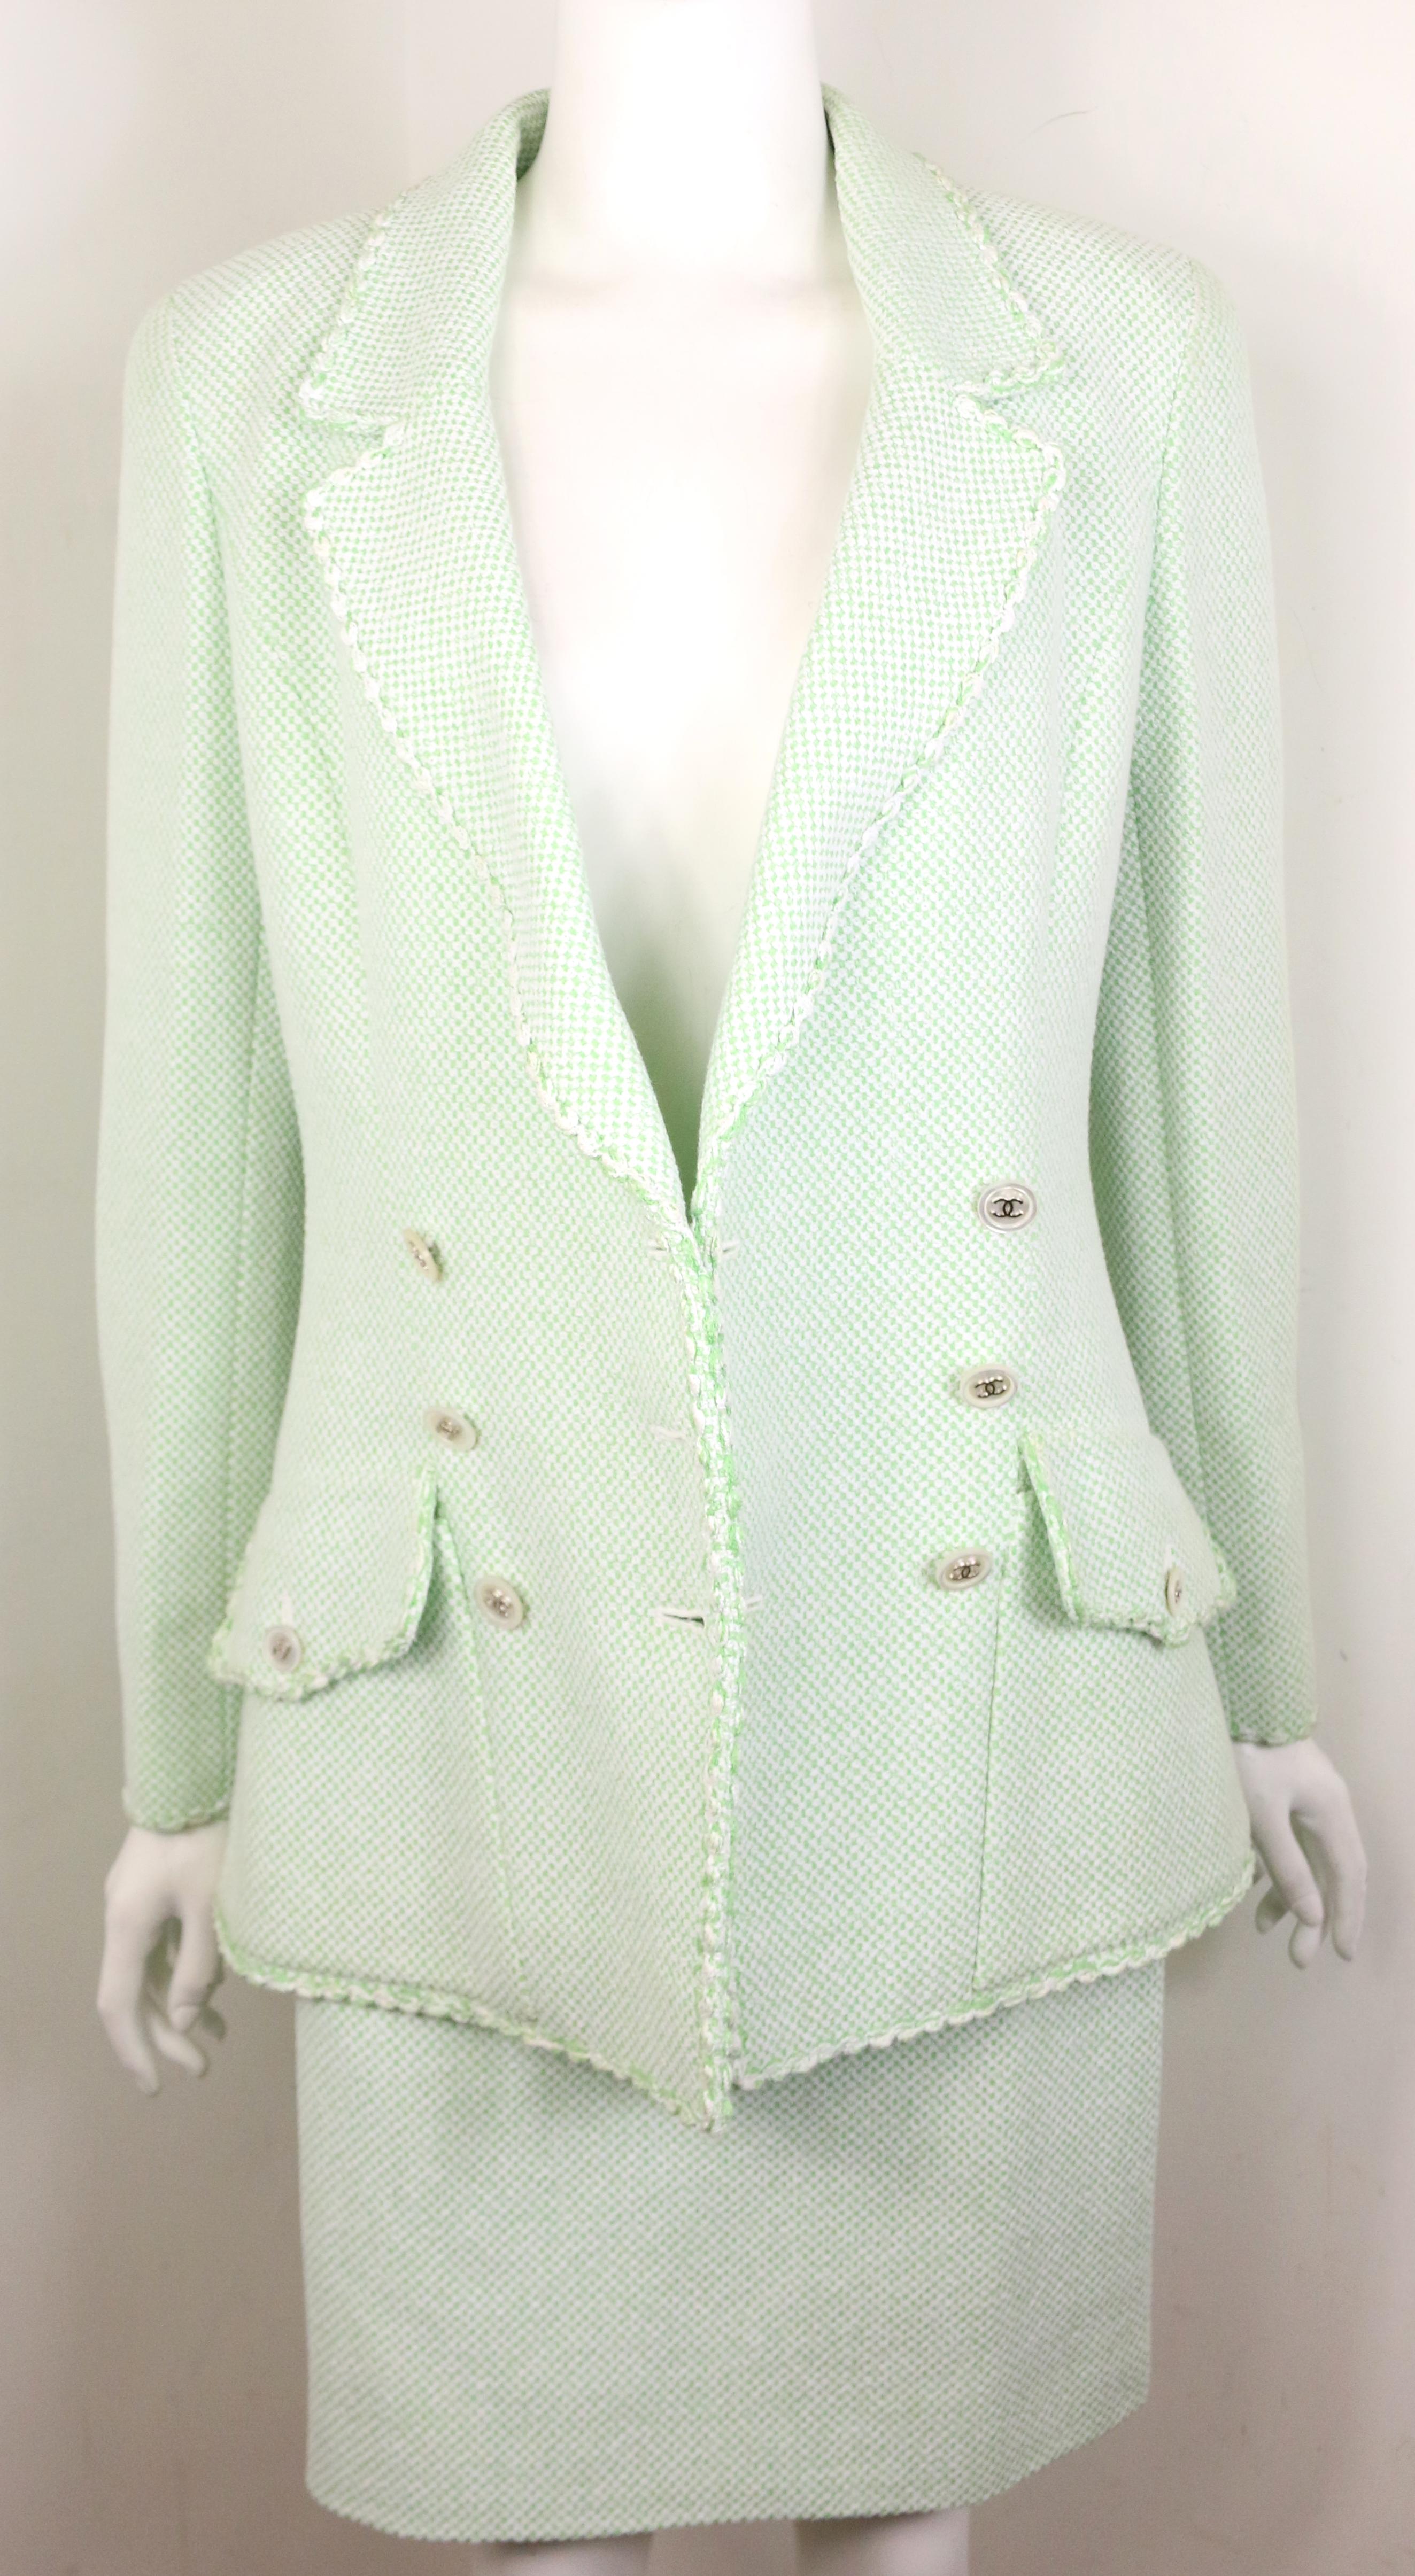 Chanel White/Green Cotton and Wool Double-Breasted Jacket and Skirt Ensemble  For Sale 2